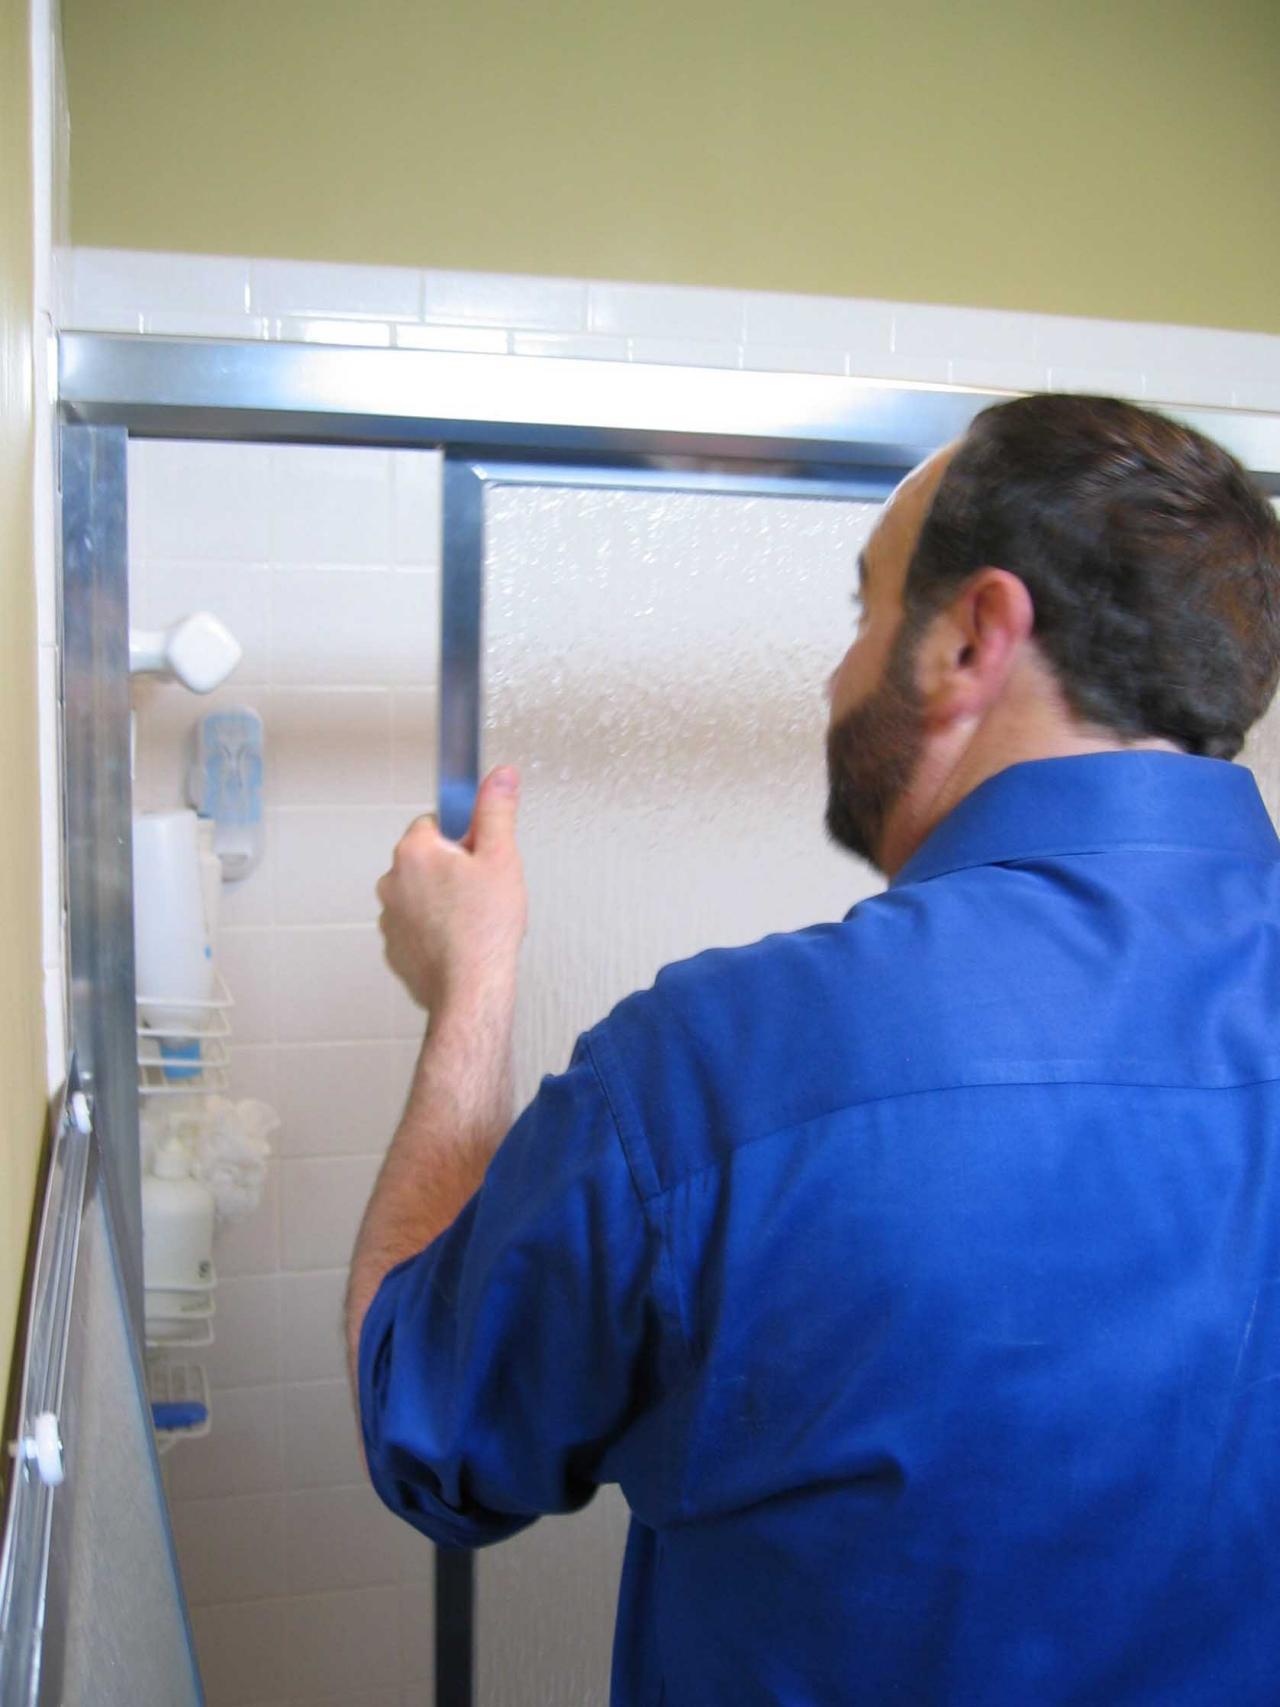 How To Replace A Shower Door Tos, Removing Shower Doors Replace With Curtain